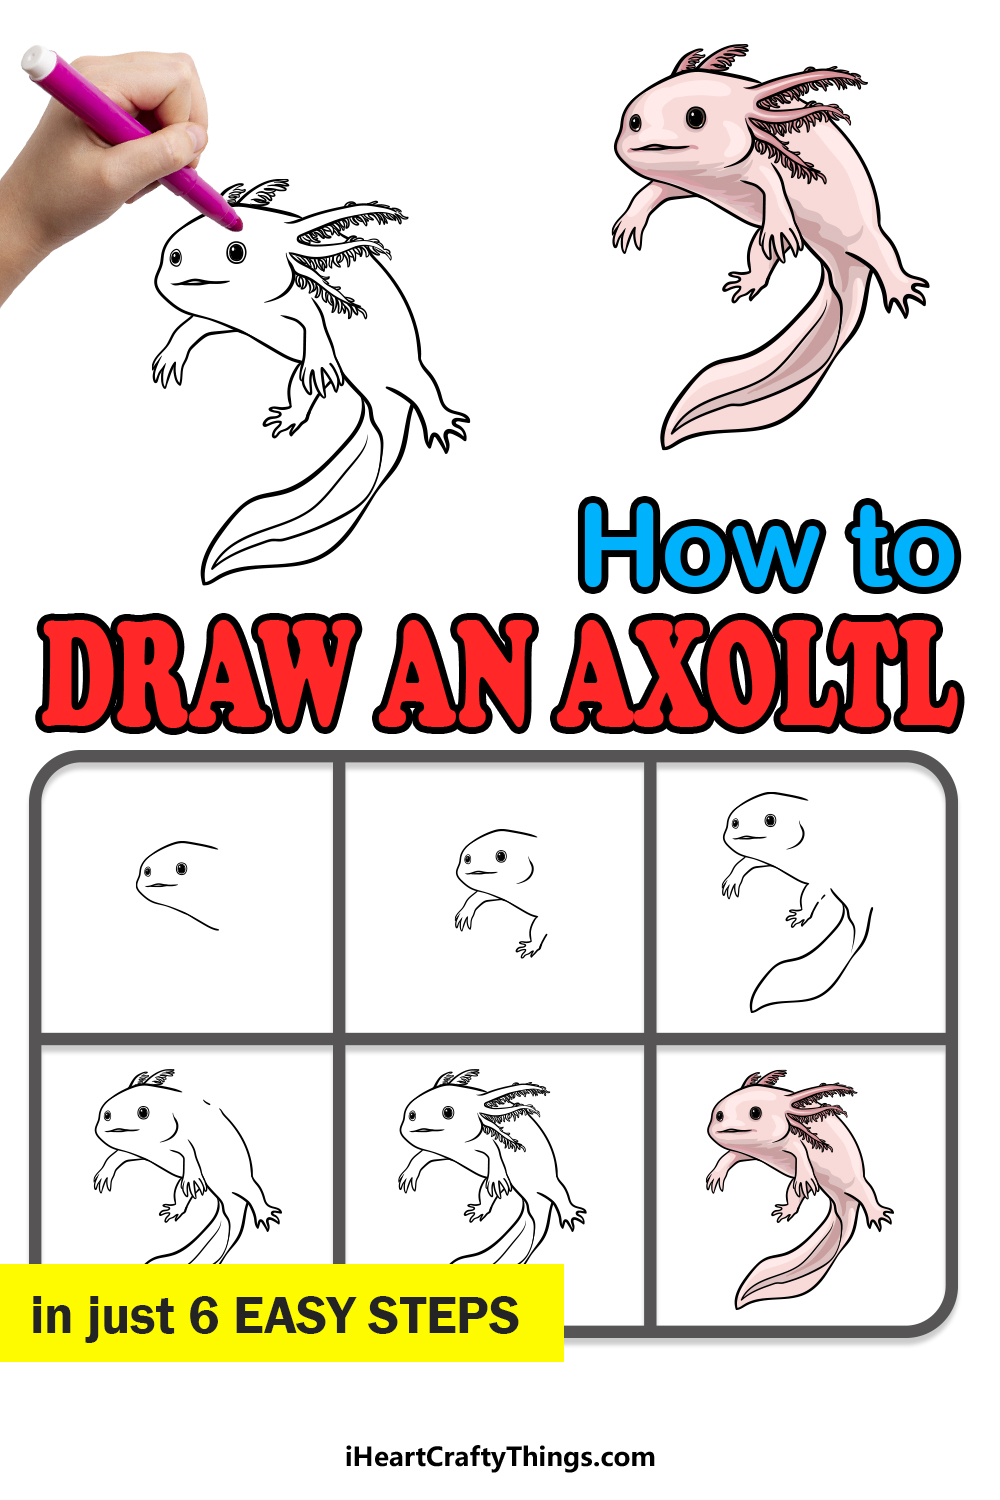 how to draw Axolotl in 6 easy steps